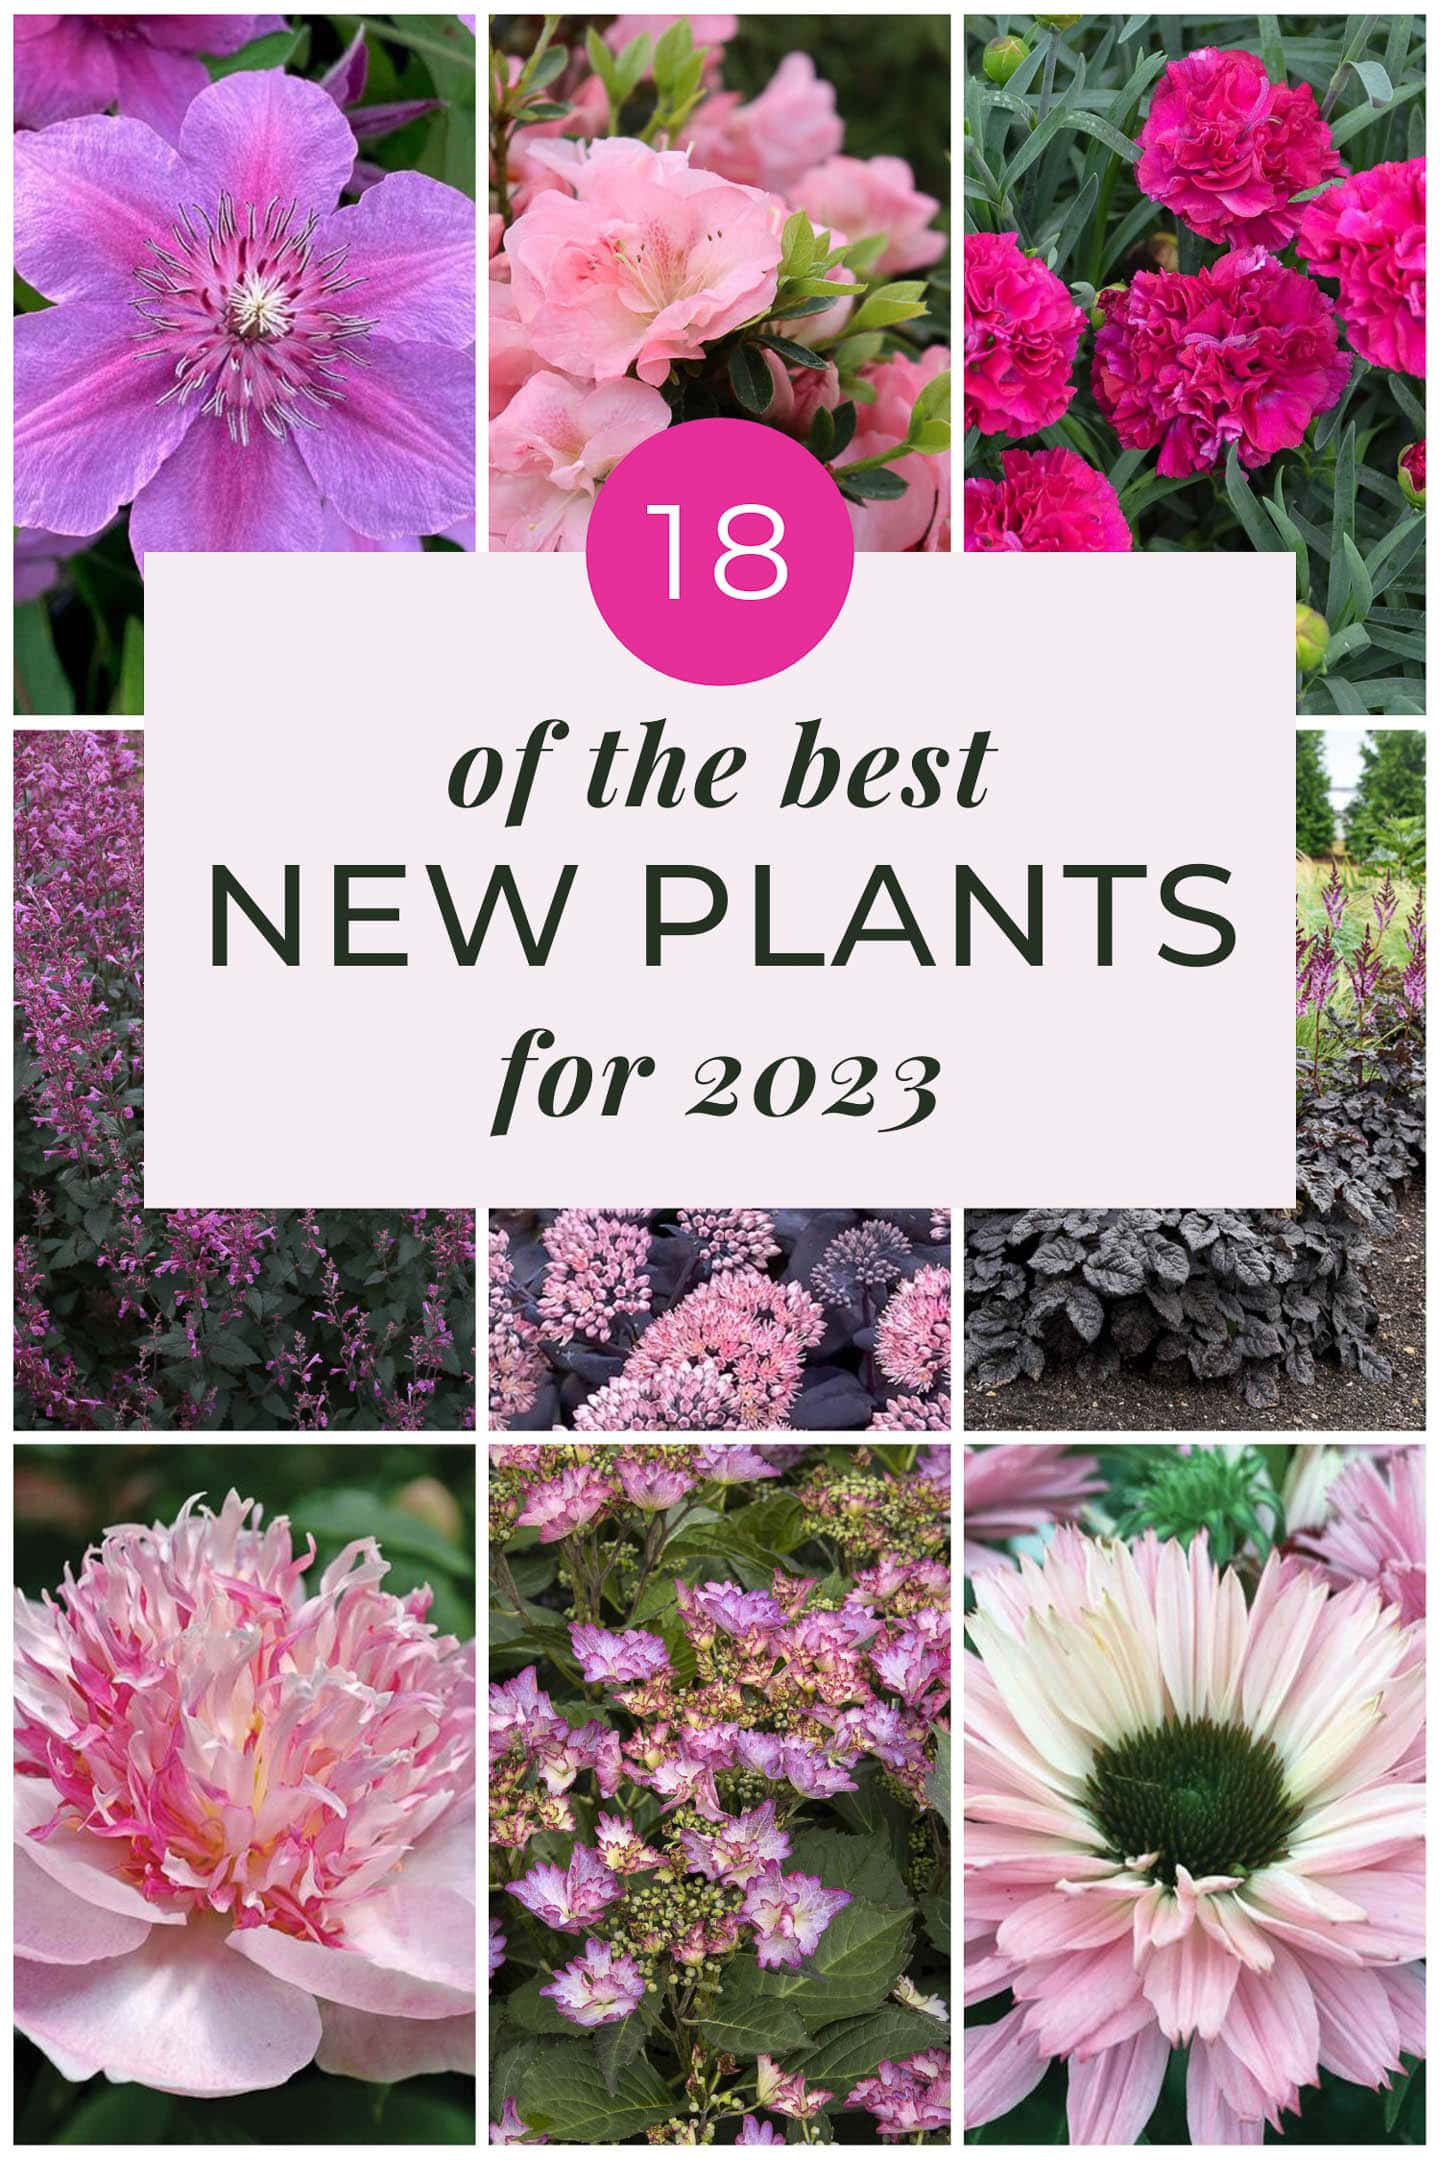 Collage of pictures of the best new plants for 2023